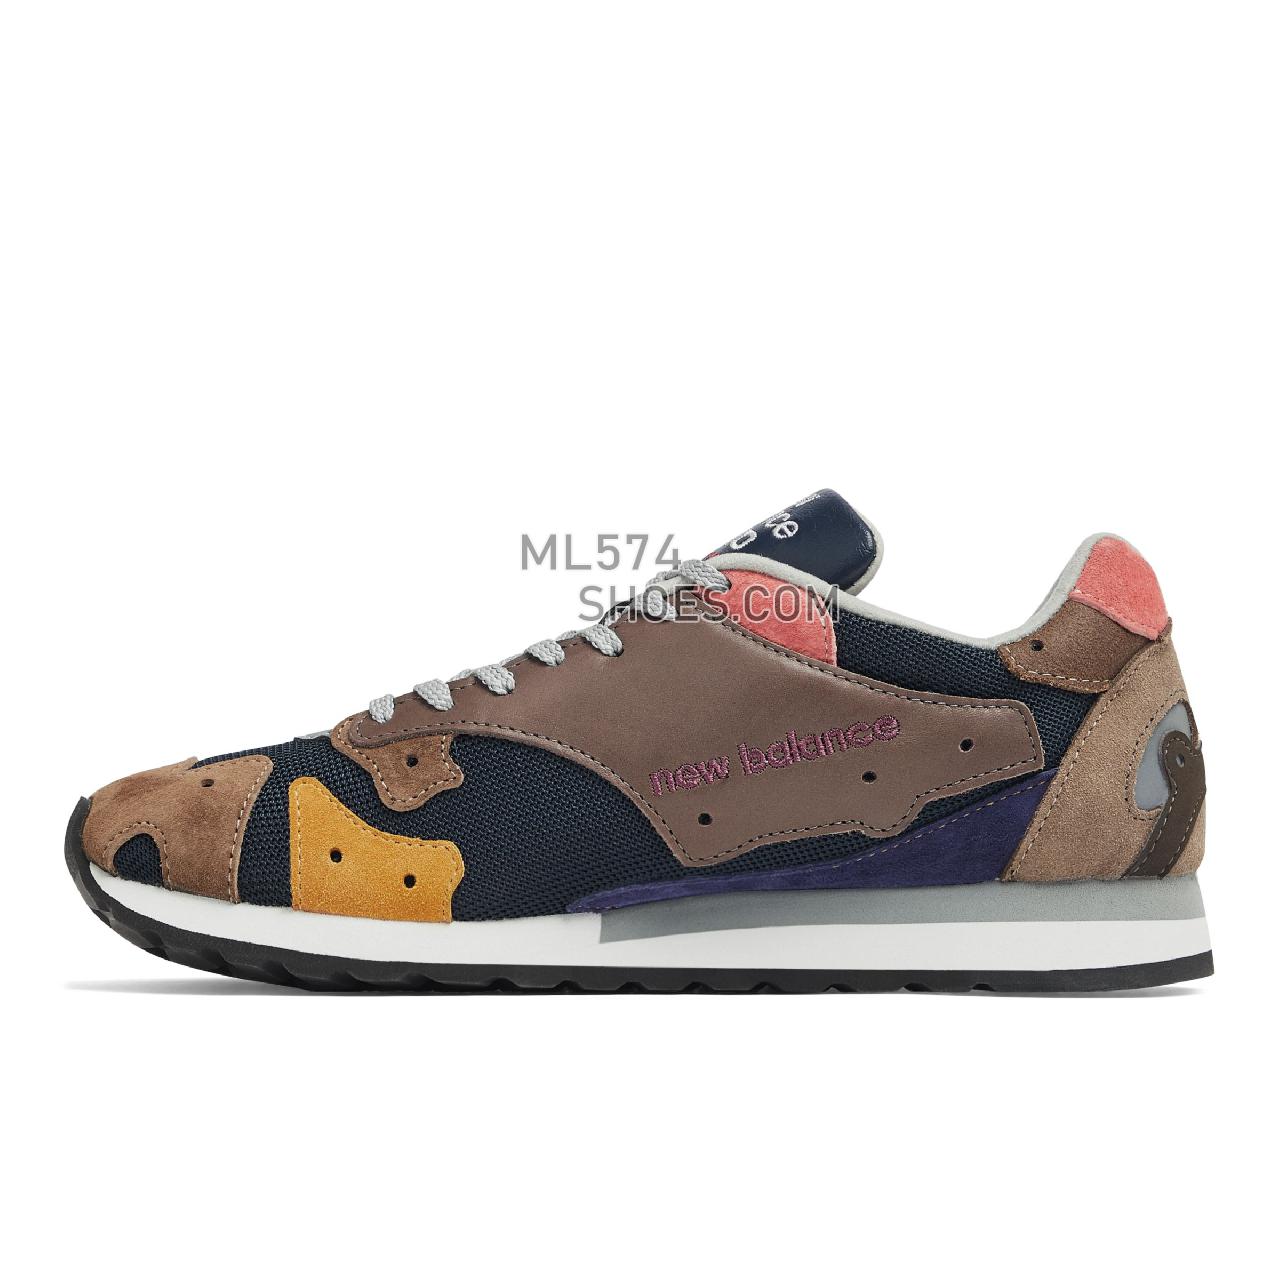 New Balance Made in UK R770 - Unisex Men's Women's Made in USA And UK Sneakers - Navy with brown and yellow - R770SPK